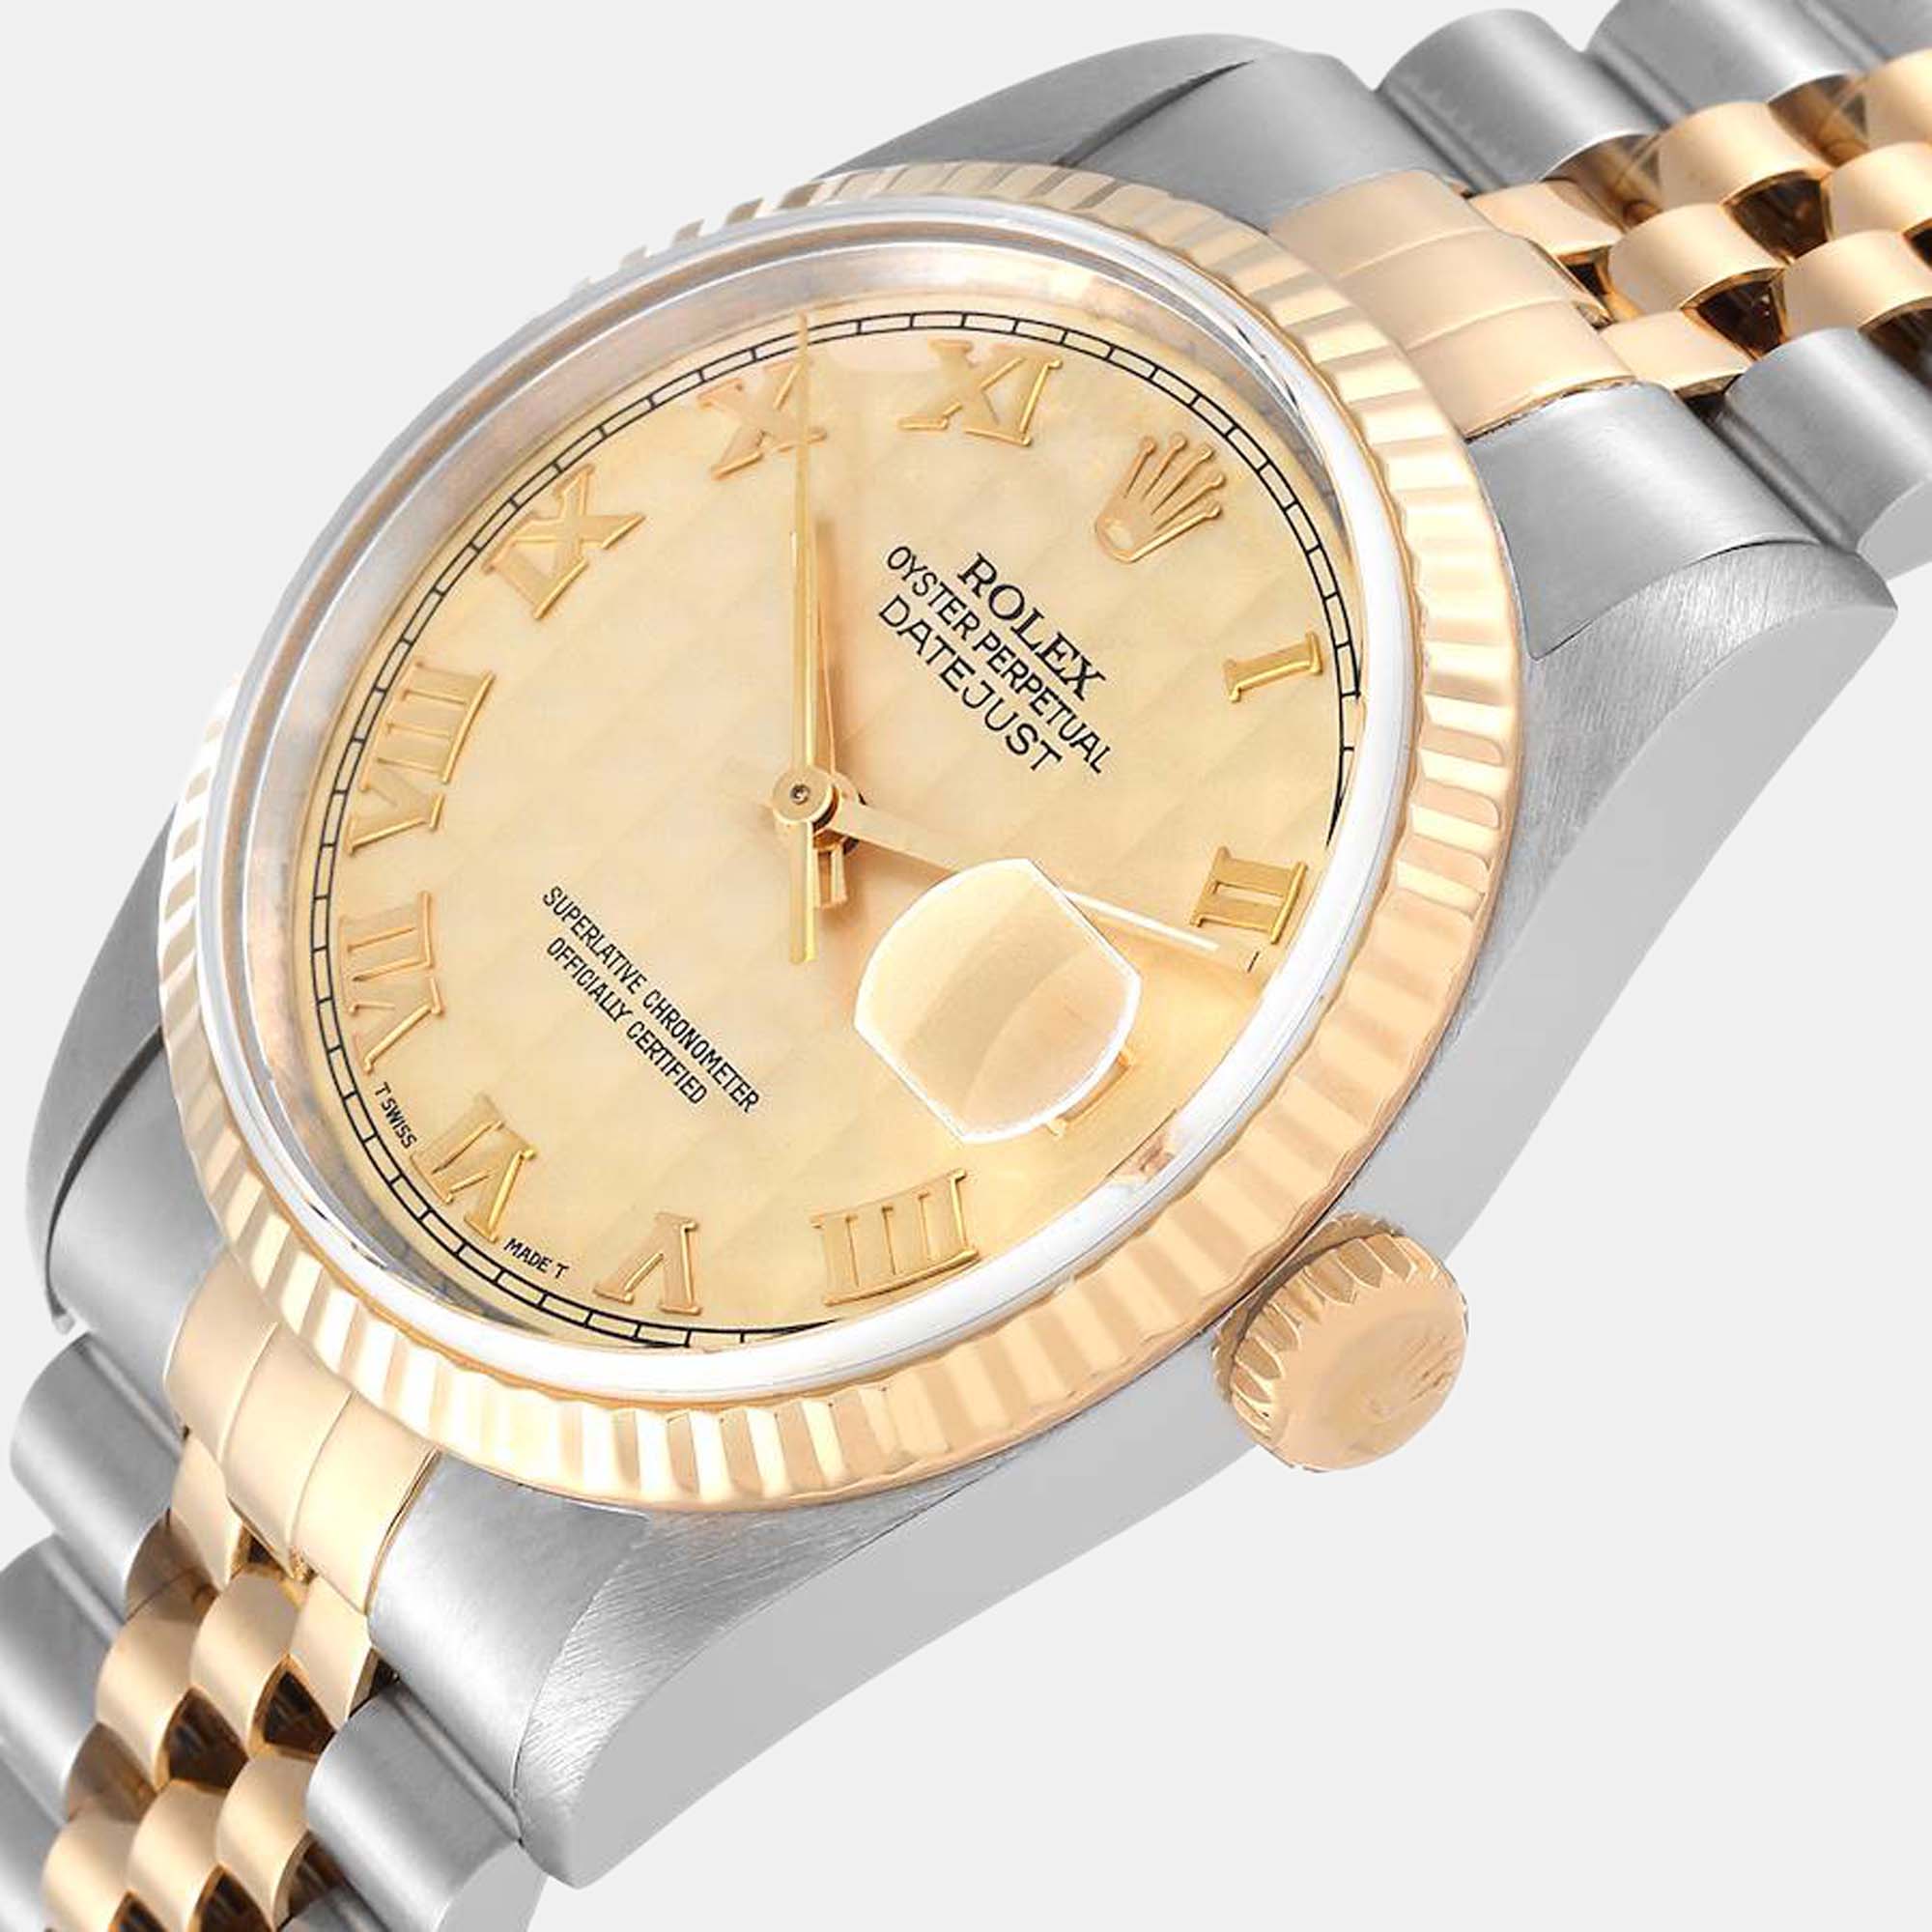 

Rolex Champagne 18k Yellow Gold And Stainless Steel Datejust 16233 Automatic Men's Wristwatch 36 mm